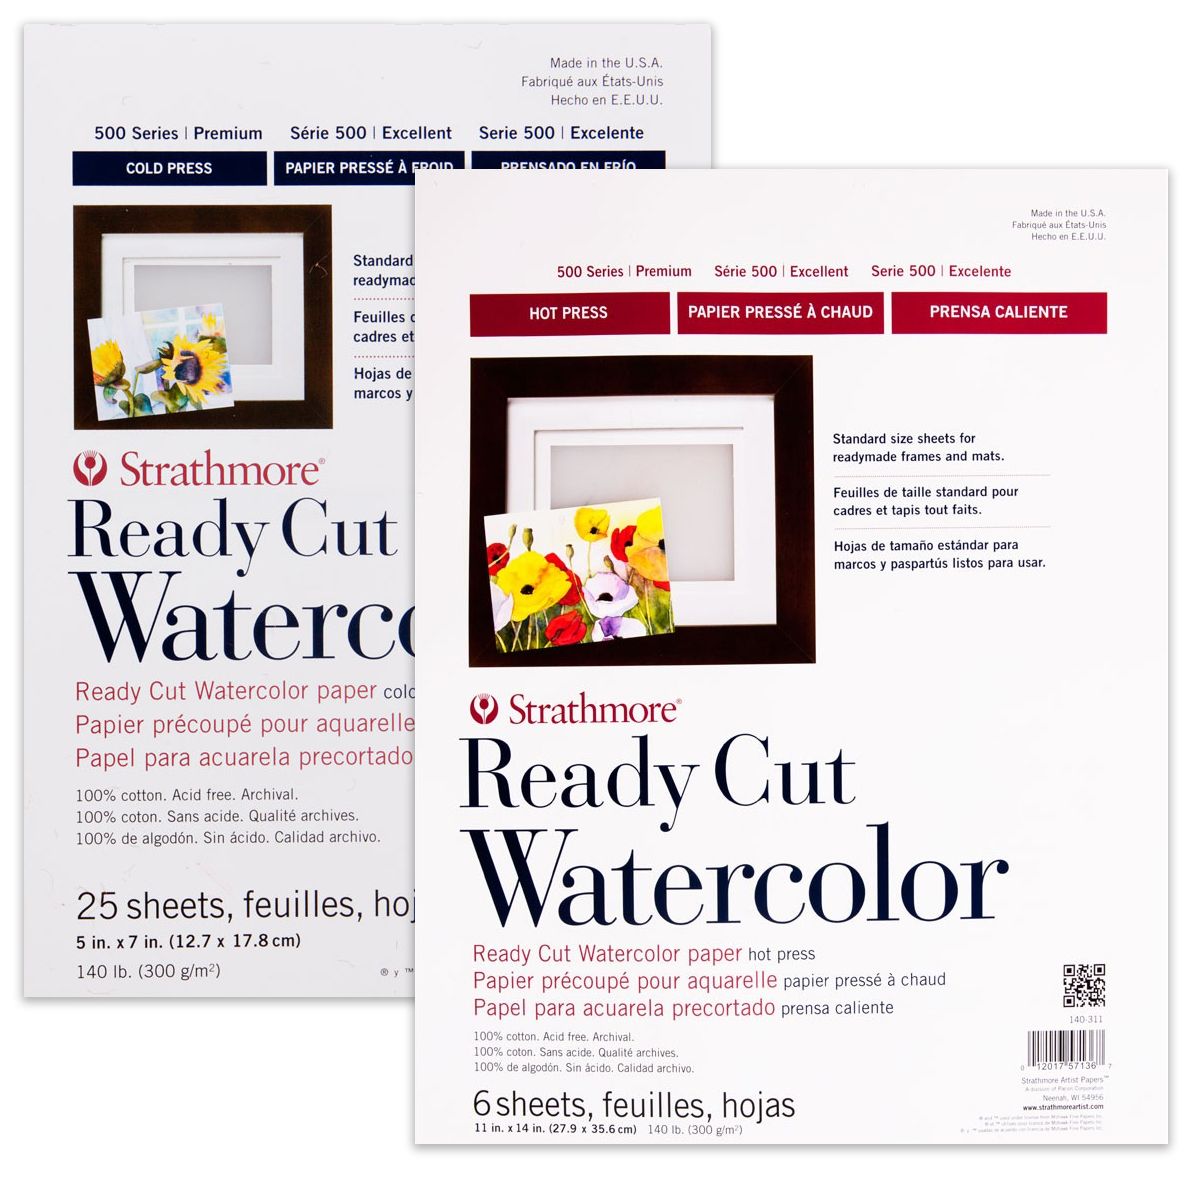 Strathmore Ready Cut Watercolor Paper Packs